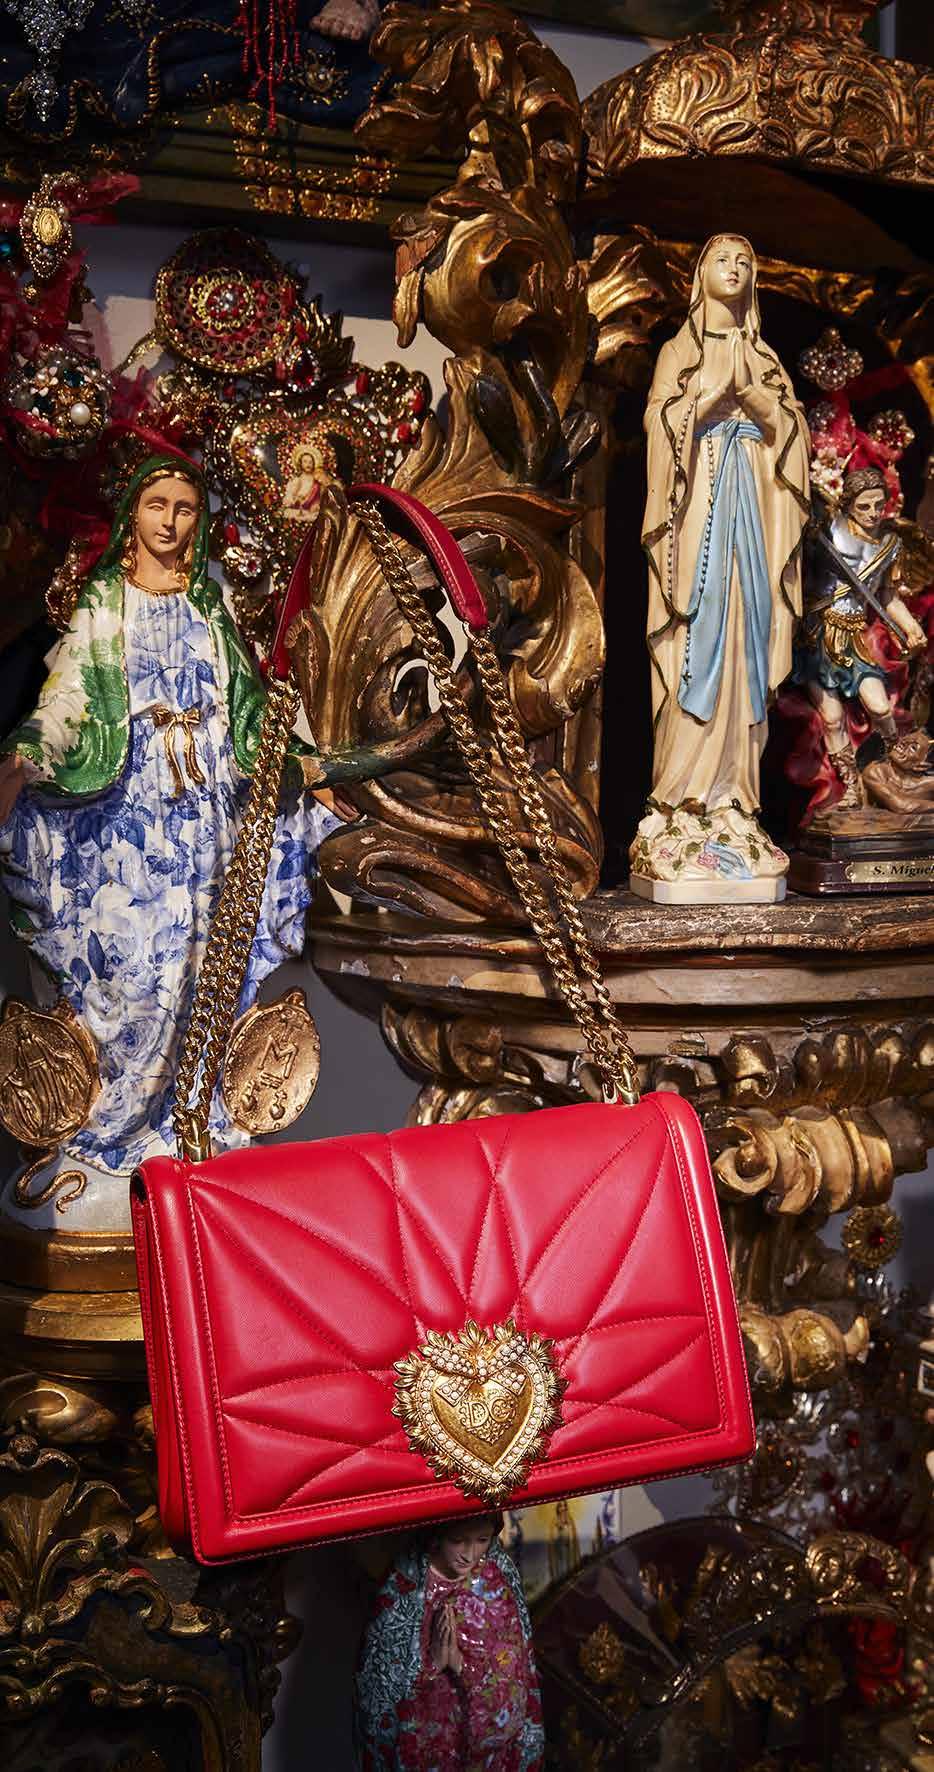 Large Devotion Bag in red quilted nappa leather, with 24K gold leaf plated shoulder chain, and central sacred heart embellishment in 24K gold leaf plated antique bronze set with pearls. POA.